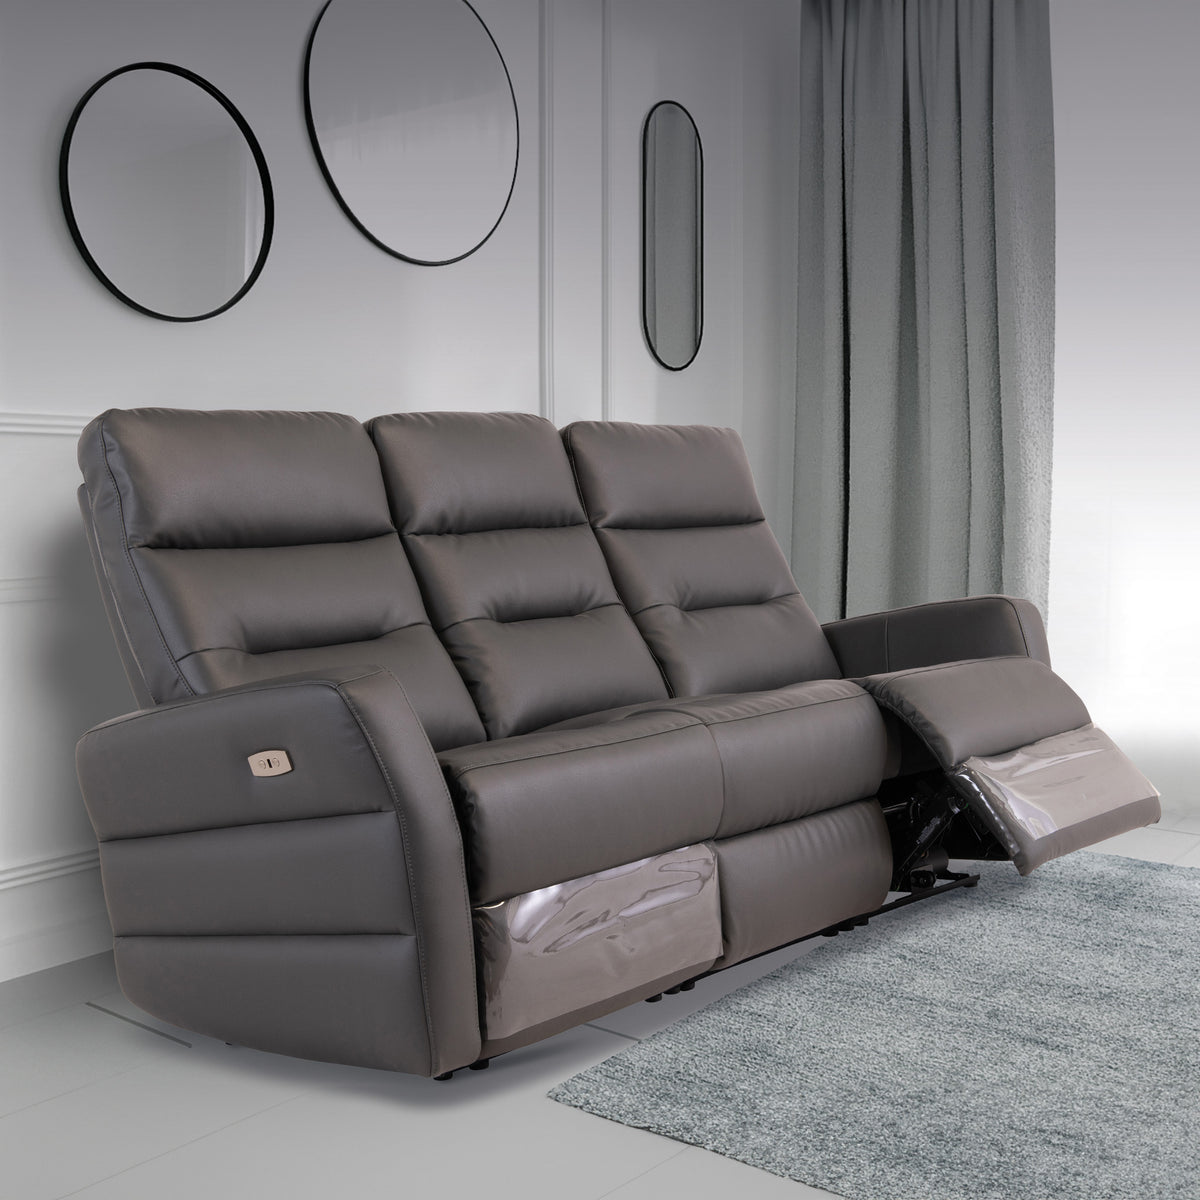 Harlem Charcoal Leather Electric Reclining 3 Seater Sofa for living room